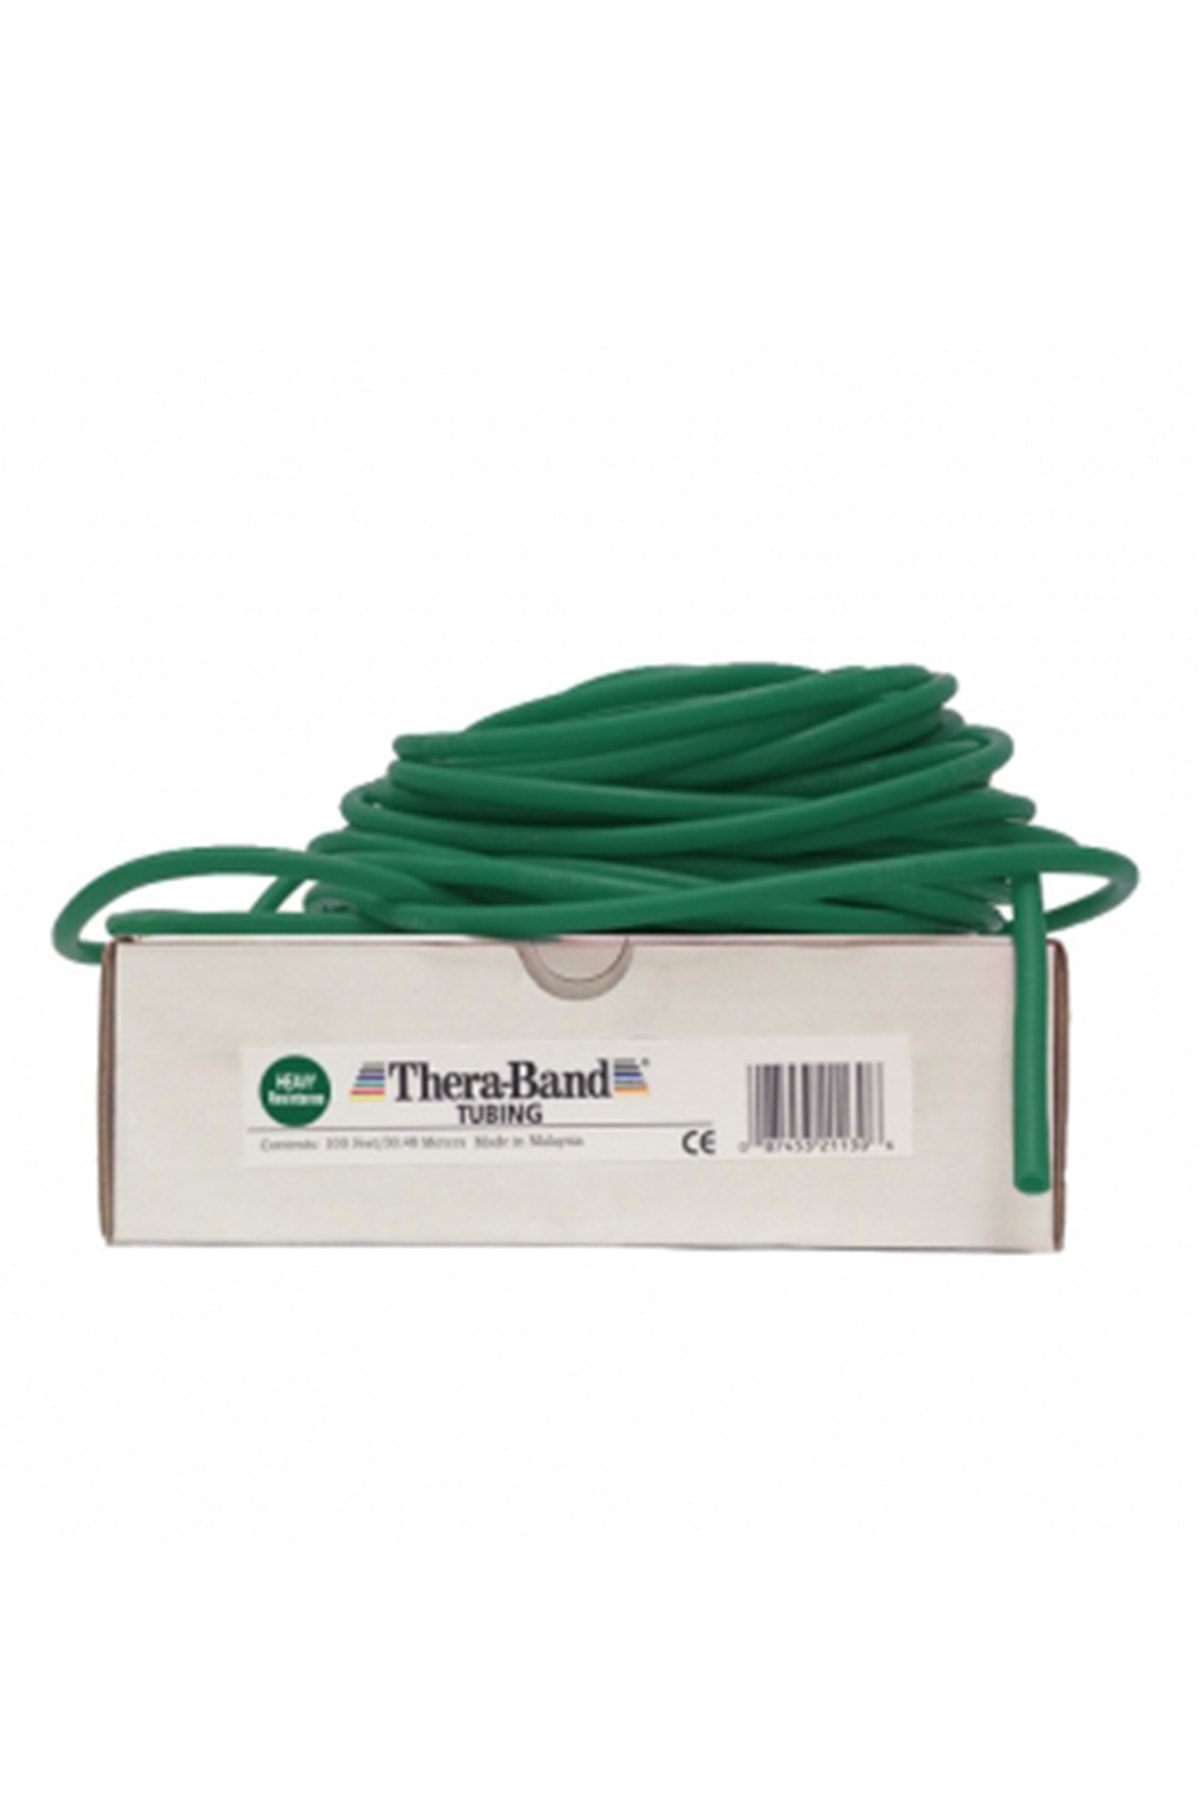 Theraband GREEN TUBING 25FT CE